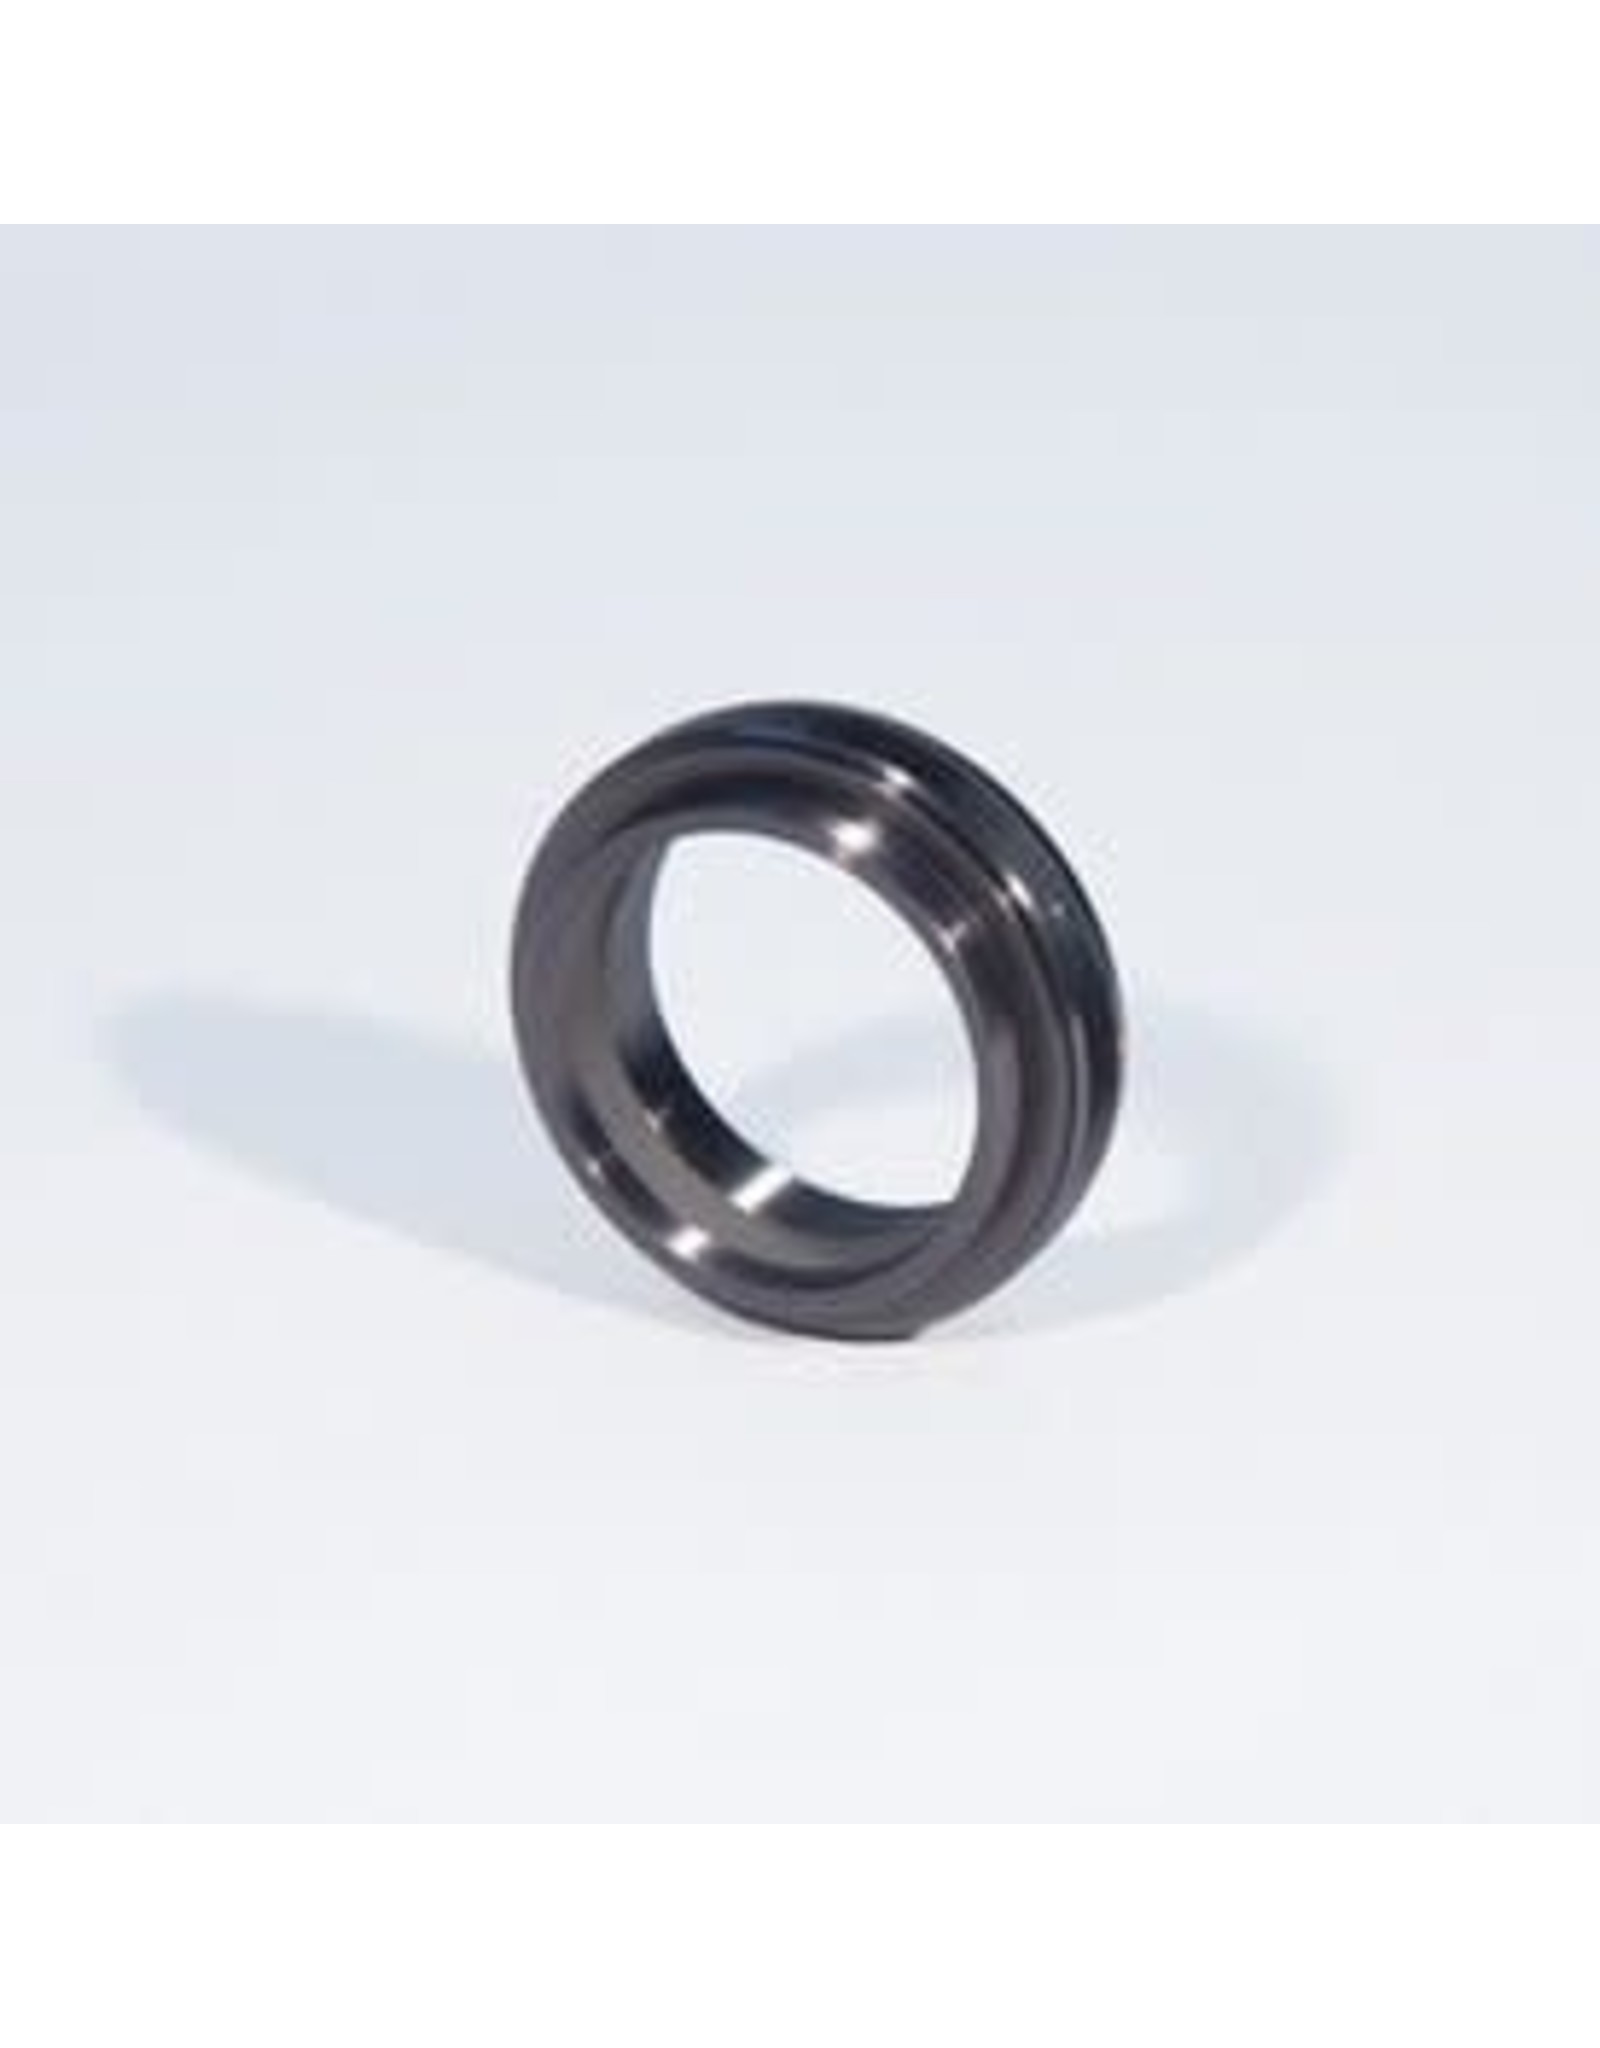 Takahashi Takahashi Wide Mount T-Ring for Canon EOS Cameras